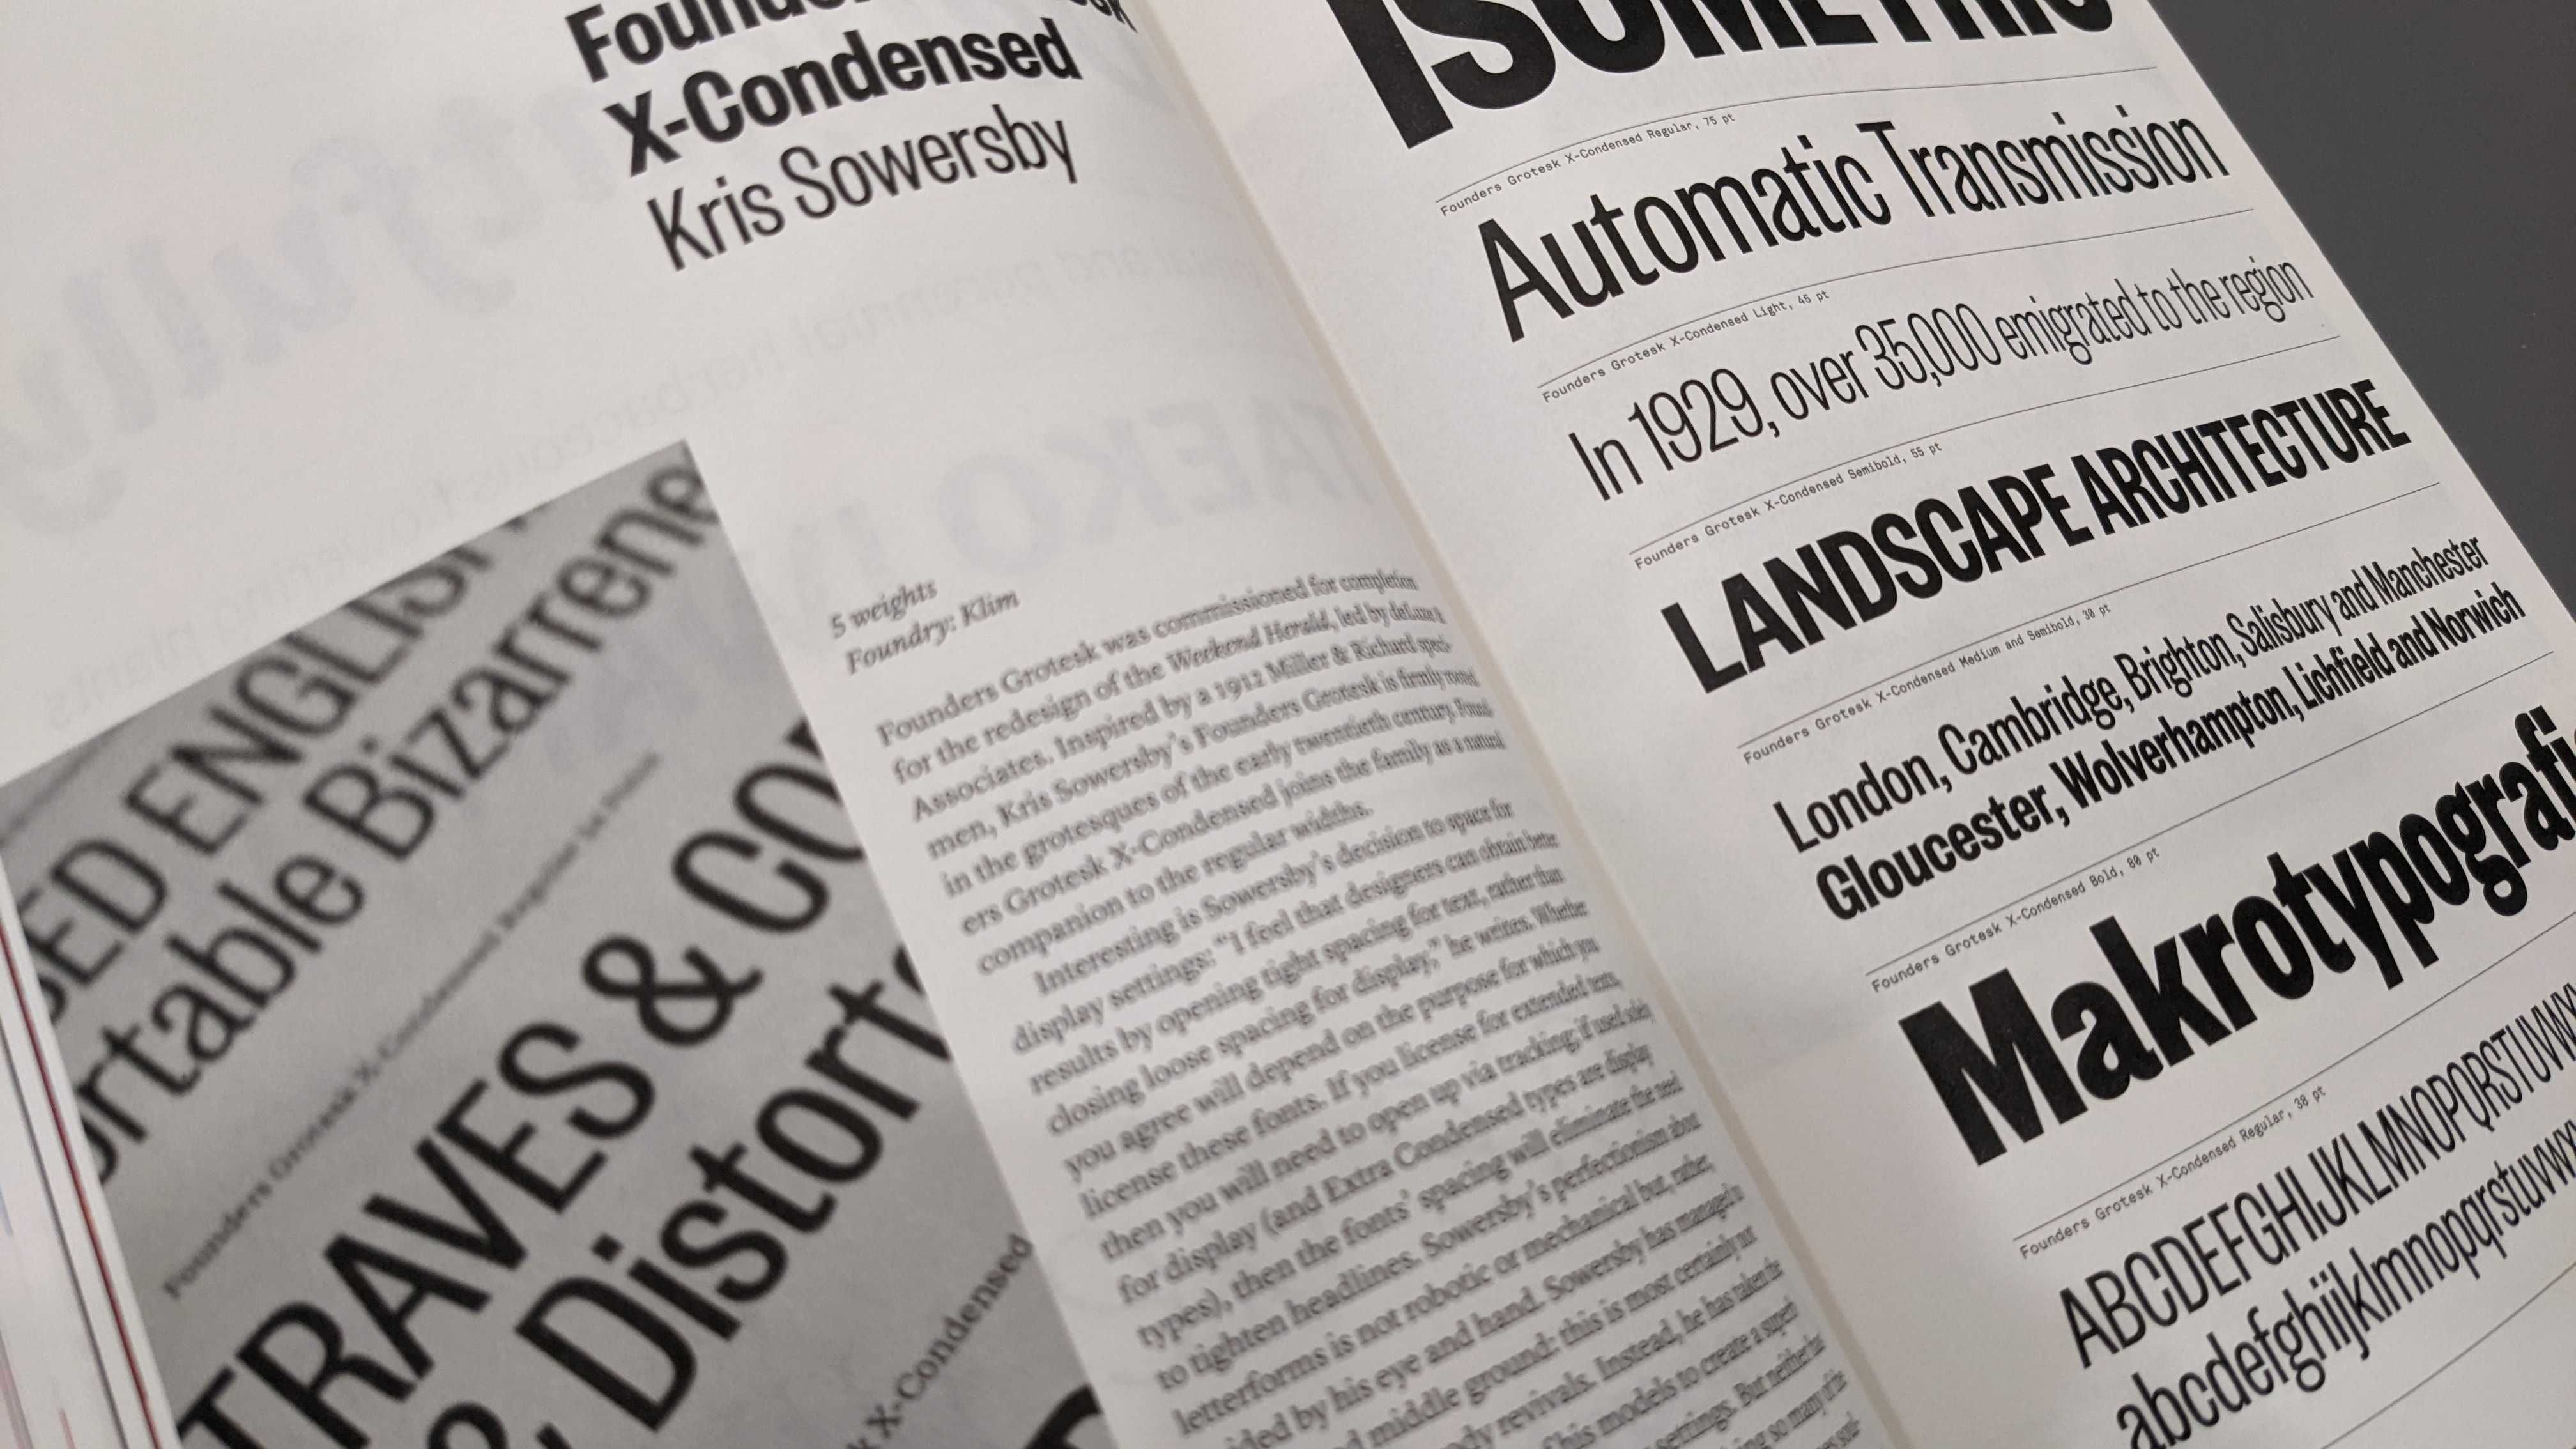 Codex: The Journal of Typography Issue 1